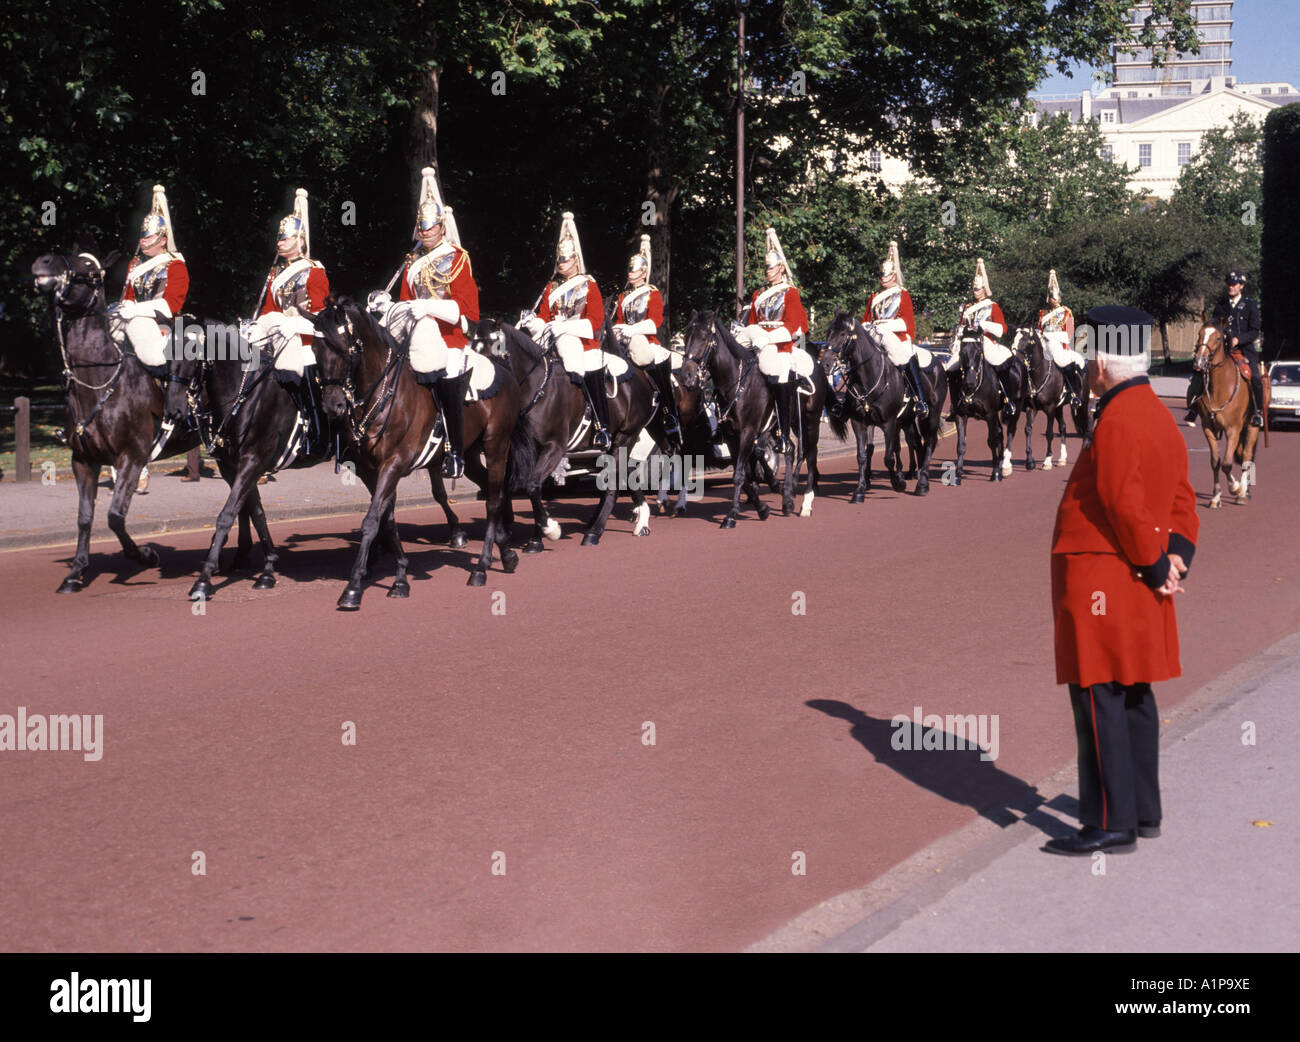 Household Kavallerry Mounted Regiment Life Guards Troopers kommen am Horse Guards Parade Ground an, beobachtet von Chelsea Rentner in Uniform London England Stockfoto